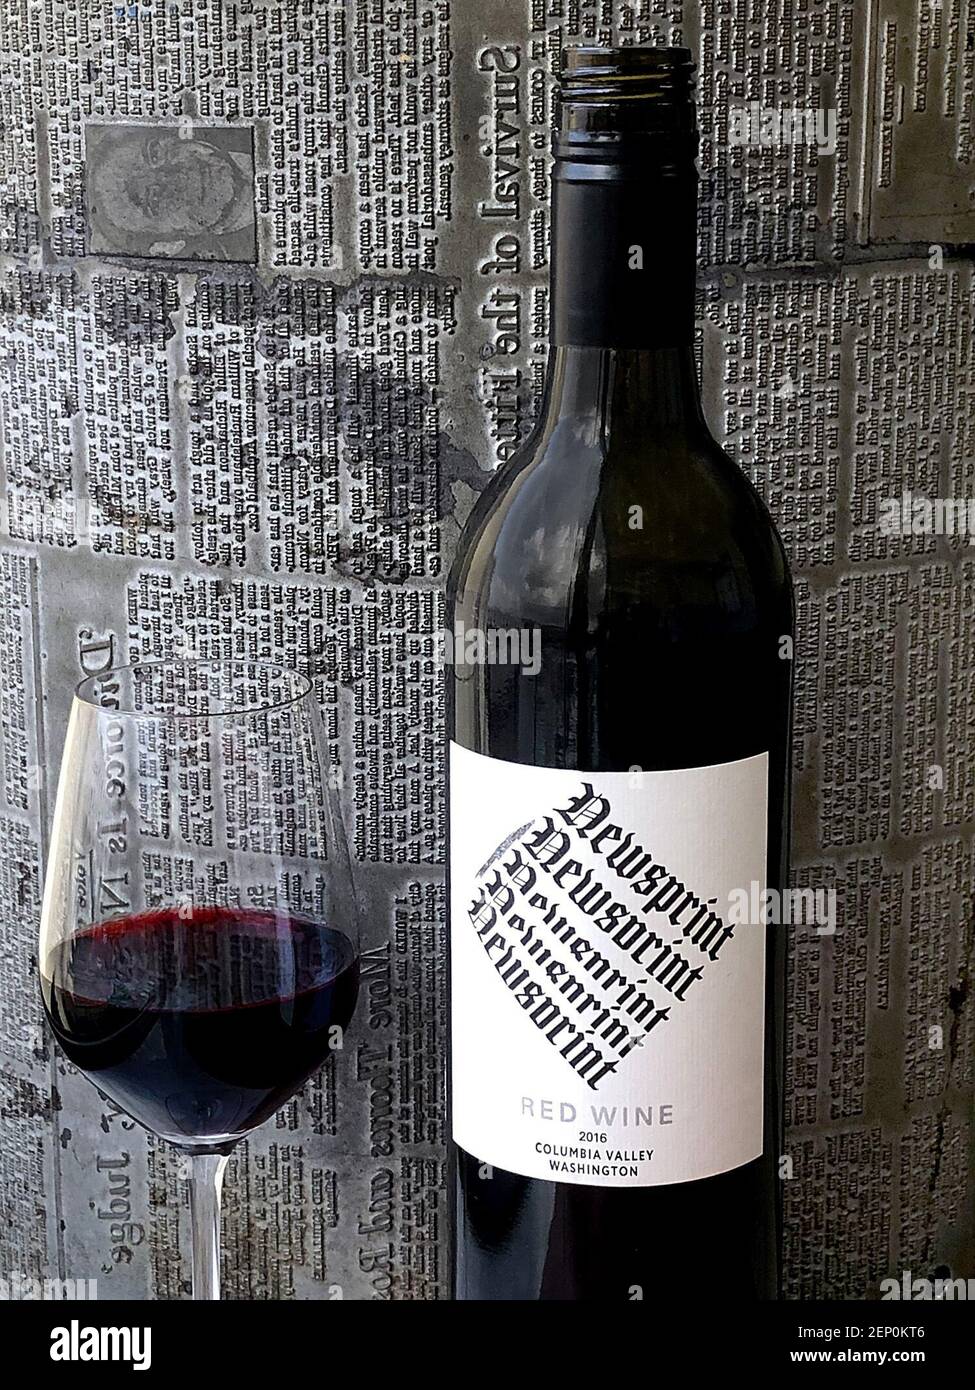 Newsprint red blend from Guardian Cellars in Woodinville, Wash. on Wednesday, Sept. 18, 2019 in Akron, Ohio. (Phil Masturzo/Akron Beacon Journal/TNS) Stock Photo